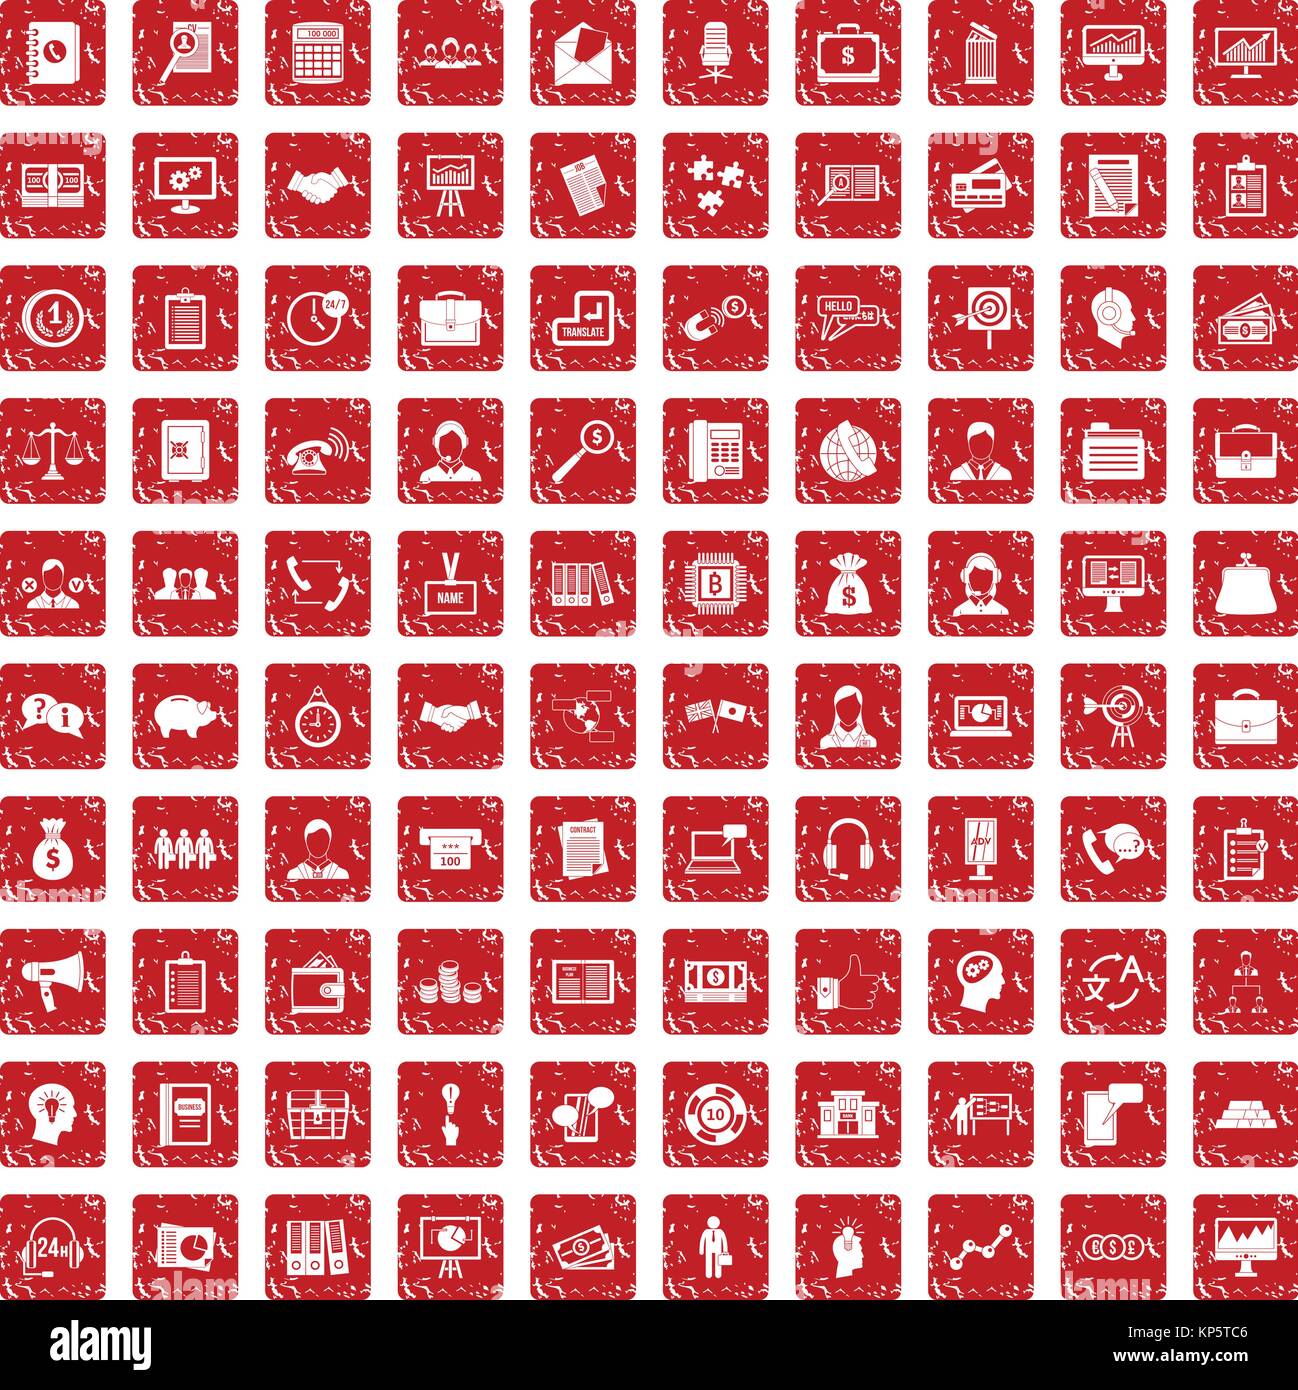 100 business people icons set grunge red Stock Vector